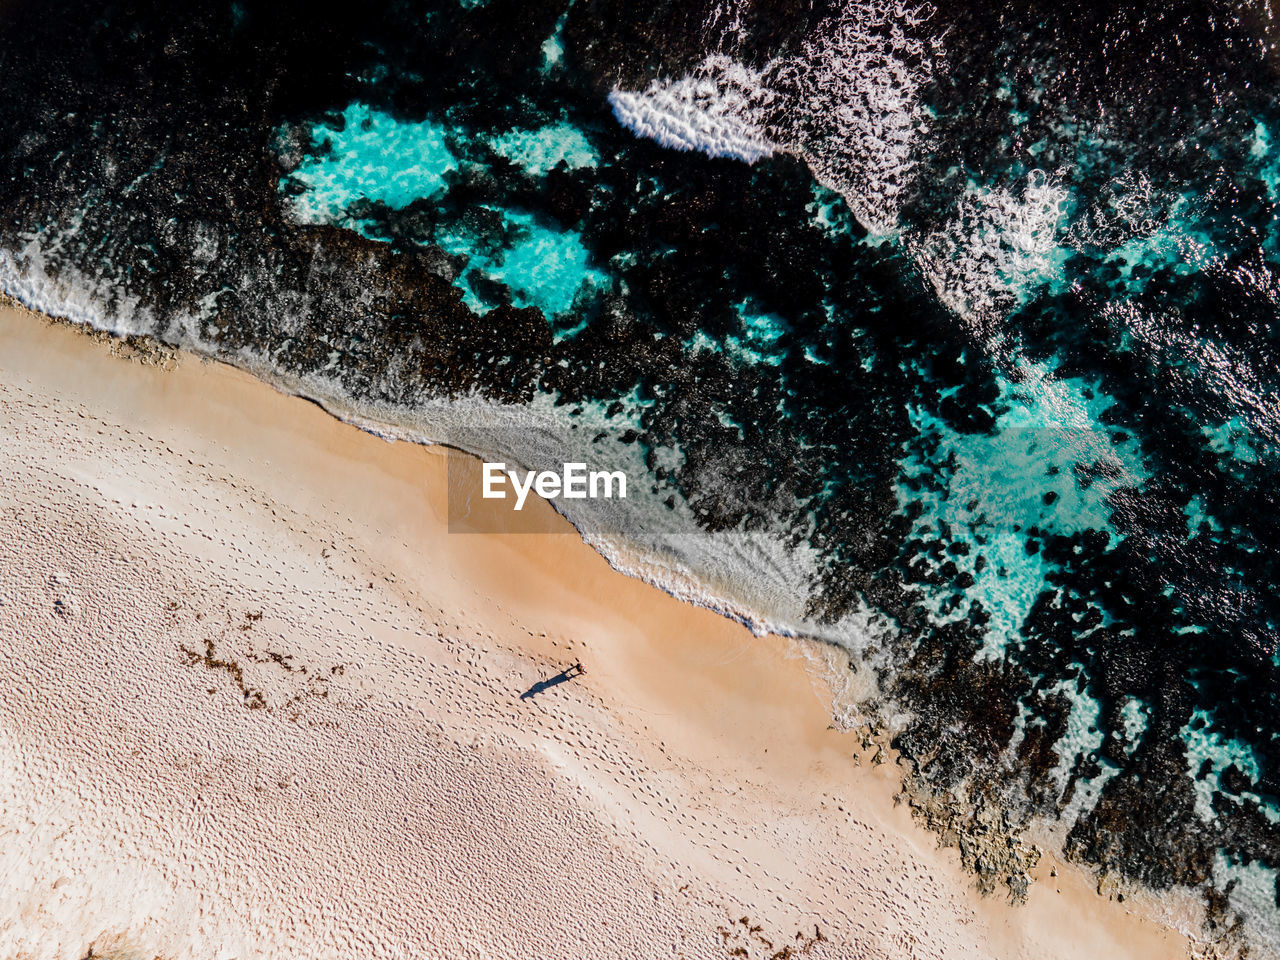 HIGH ANGLE VIEW OF BEACH ON SHORE